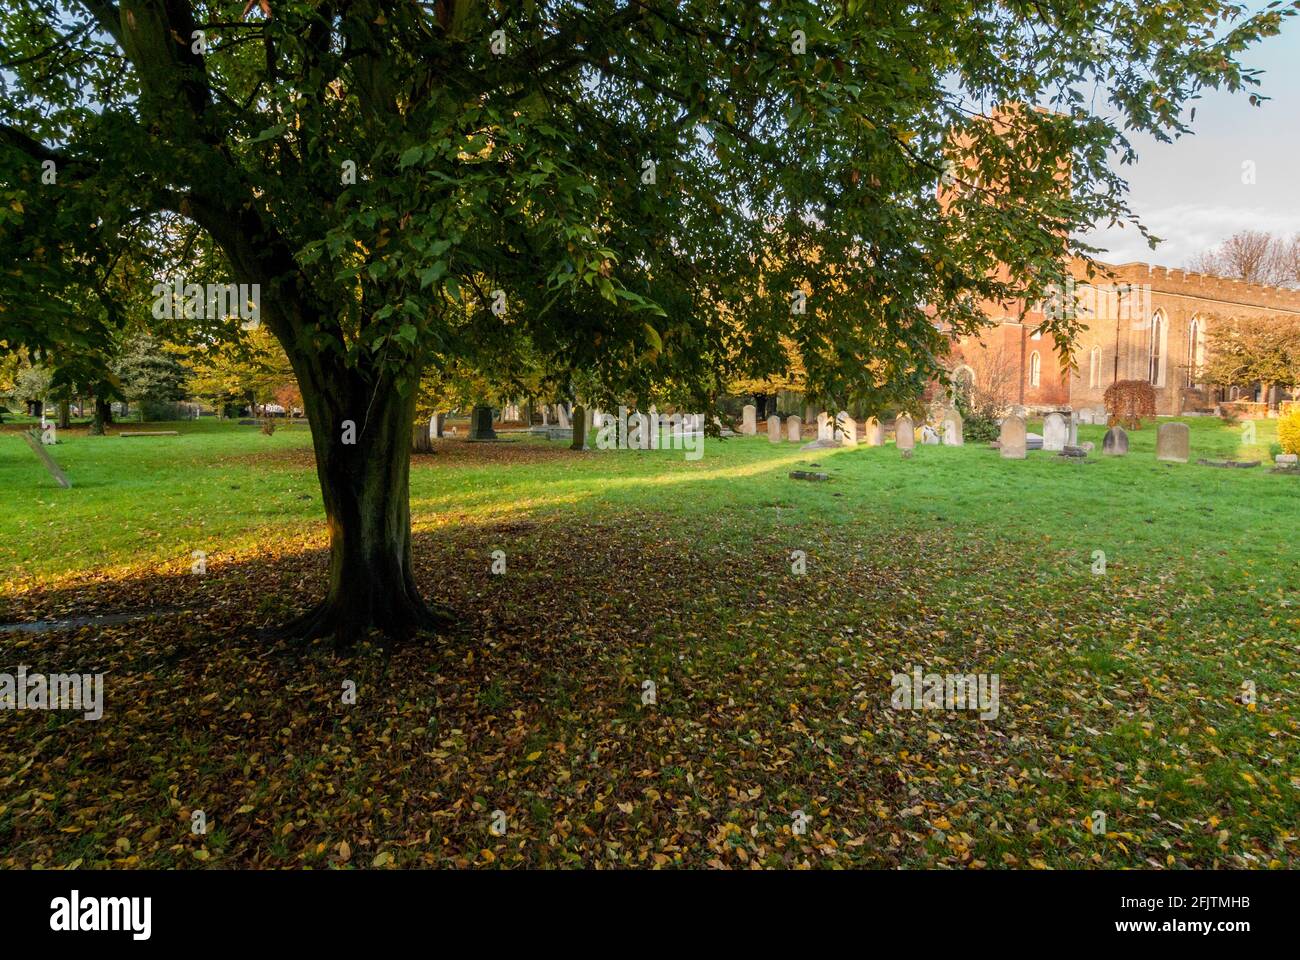 The churchyard of St Mary's Church, Staines-upon-Thames, UK, in autumn. Stock Photo